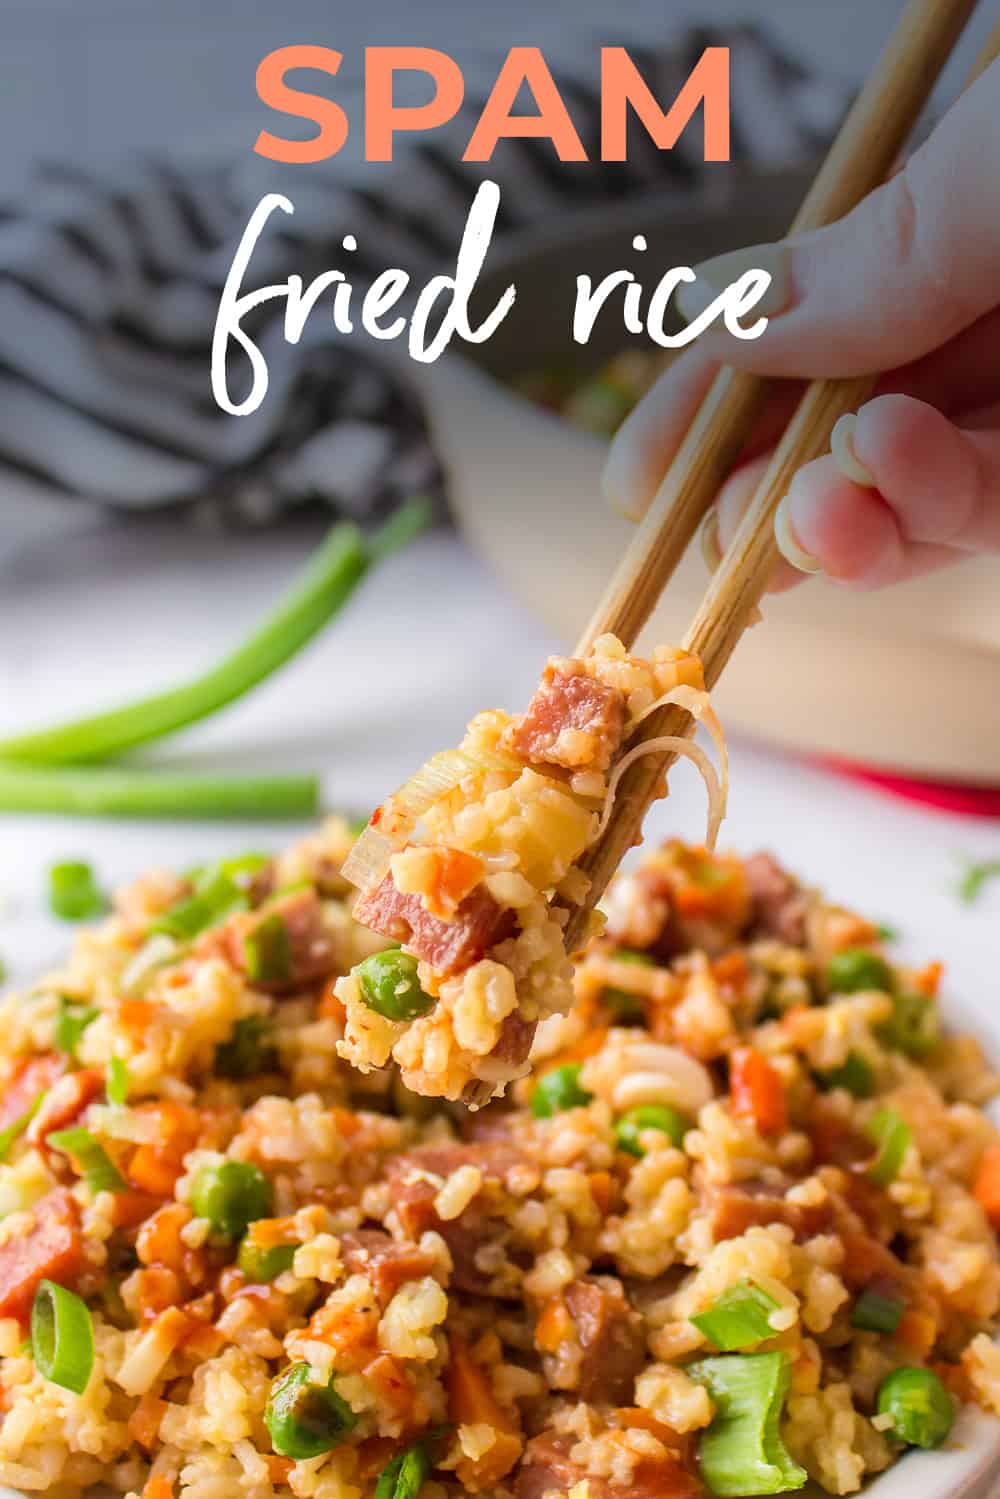 Hand using chopsticks to scoop up fried rice.